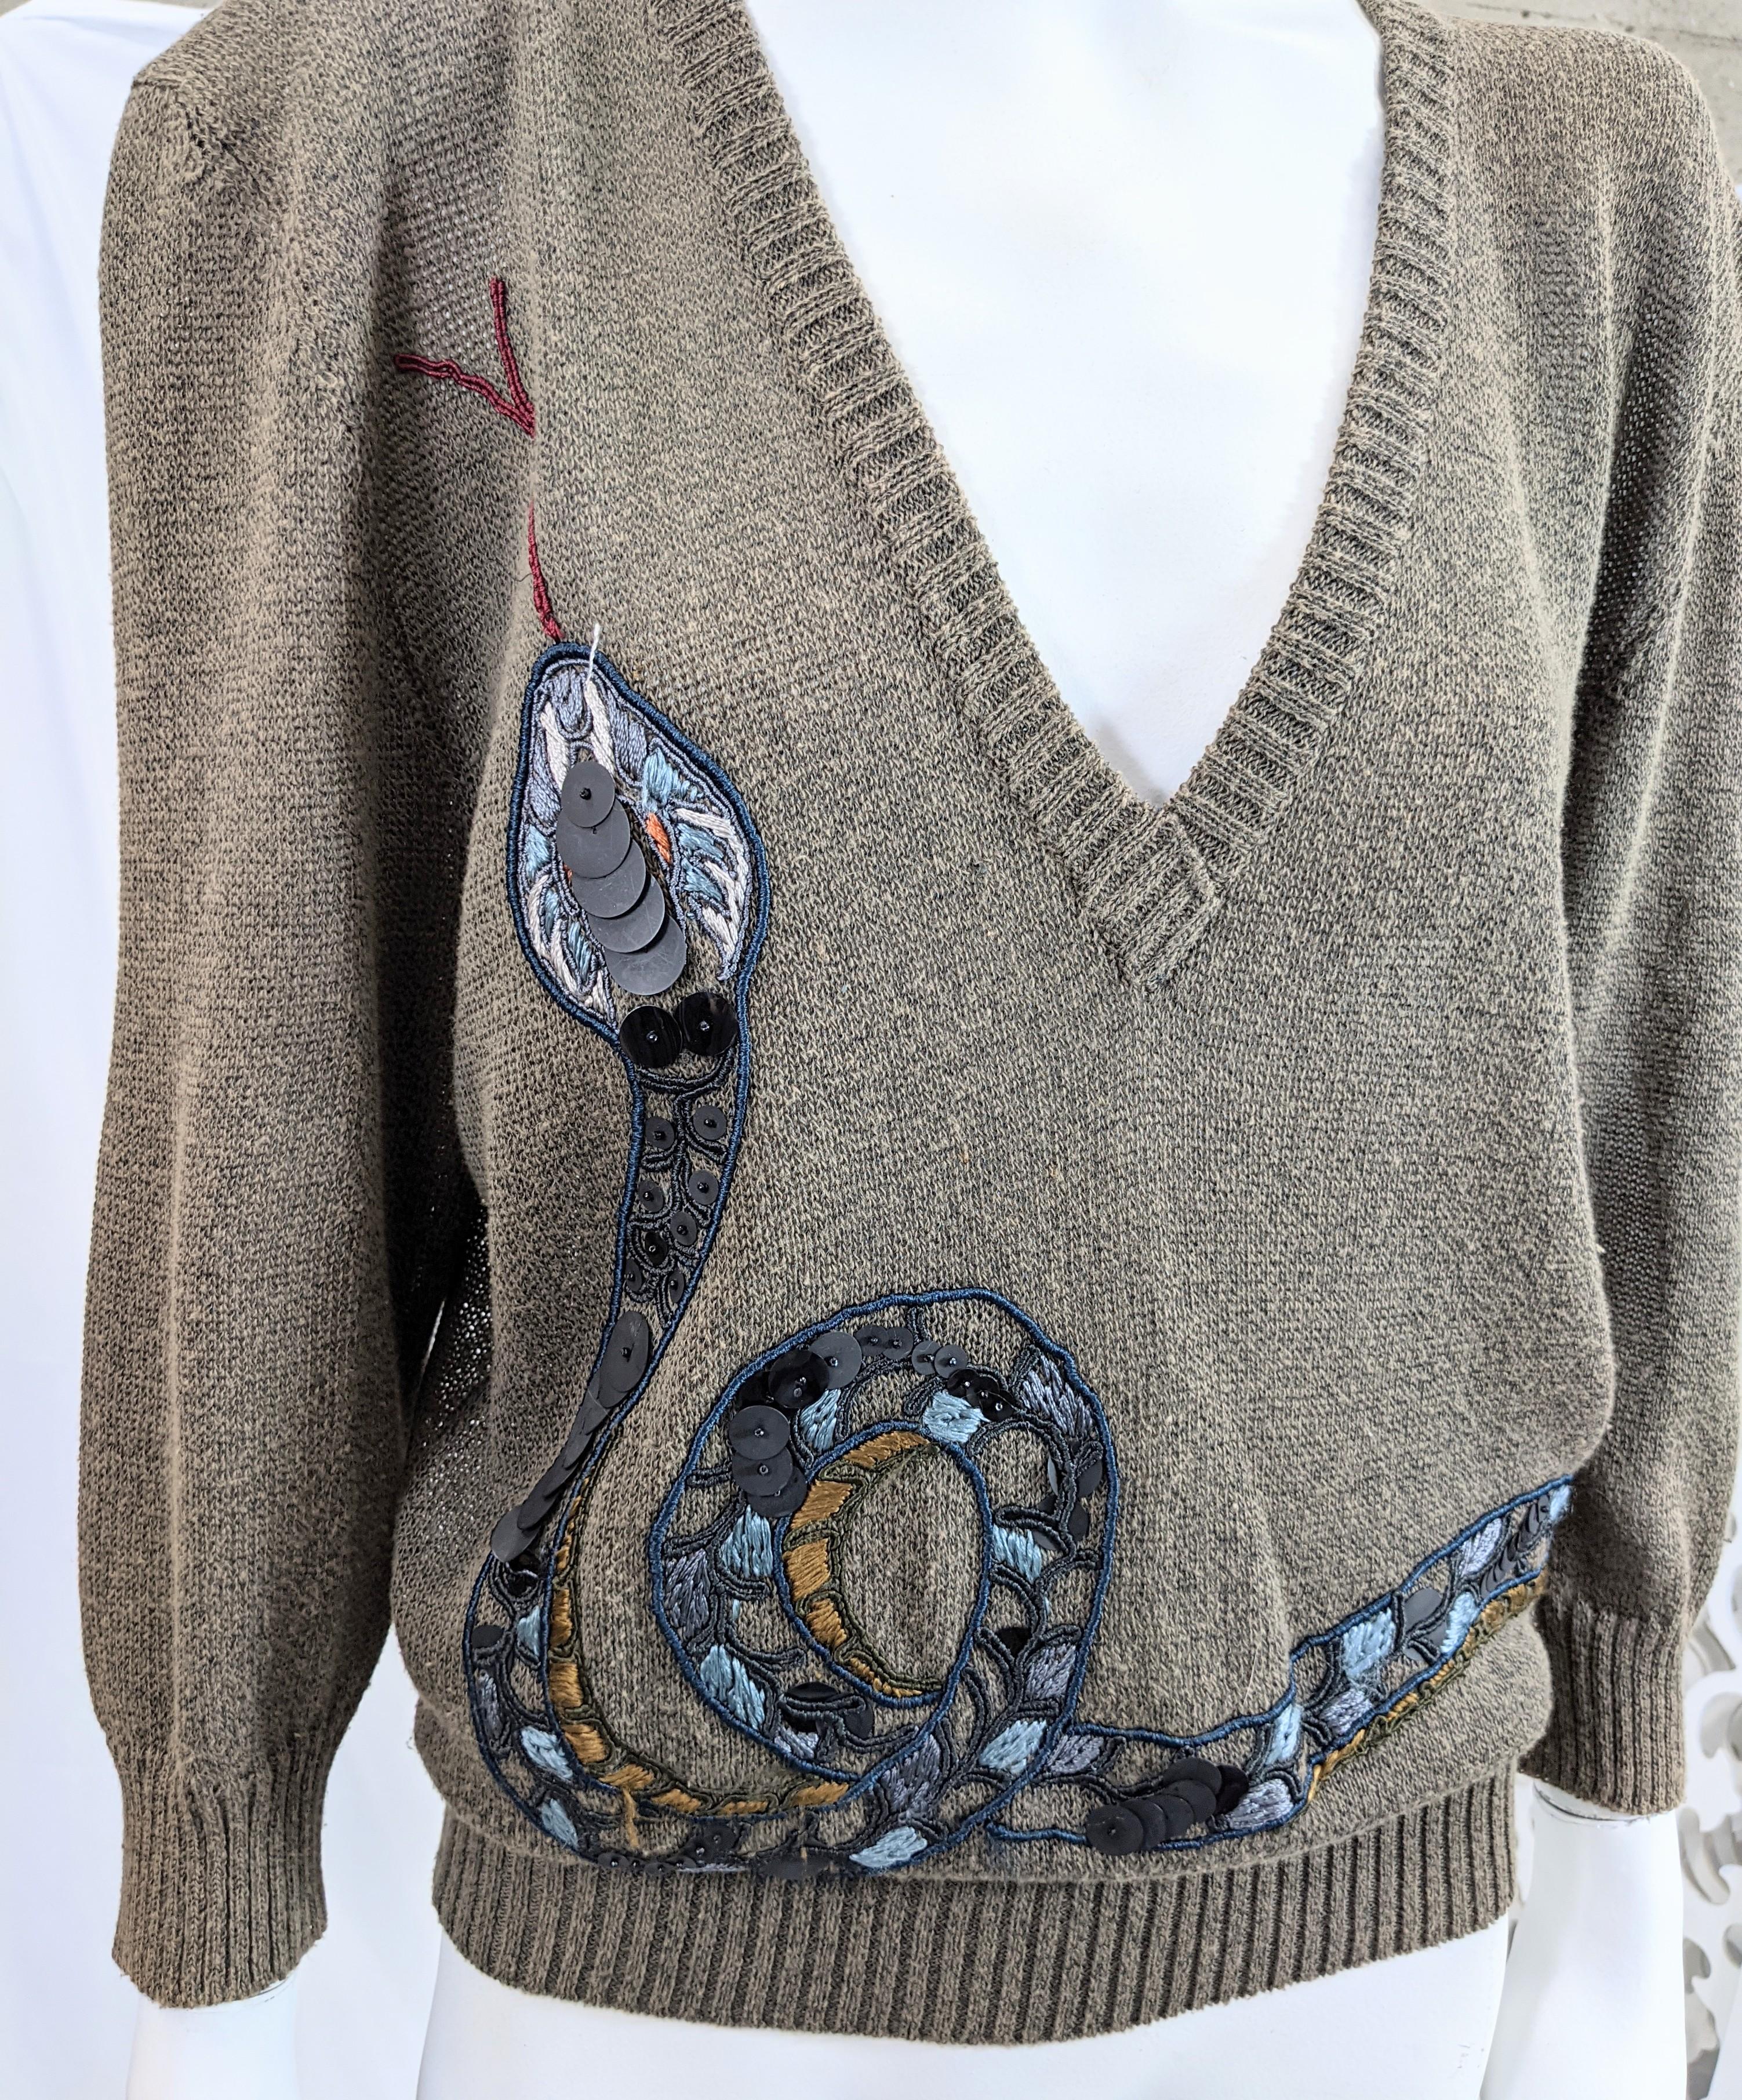 Krizia Coiled Serpent Sweater In Excellent Condition For Sale In New York, NY